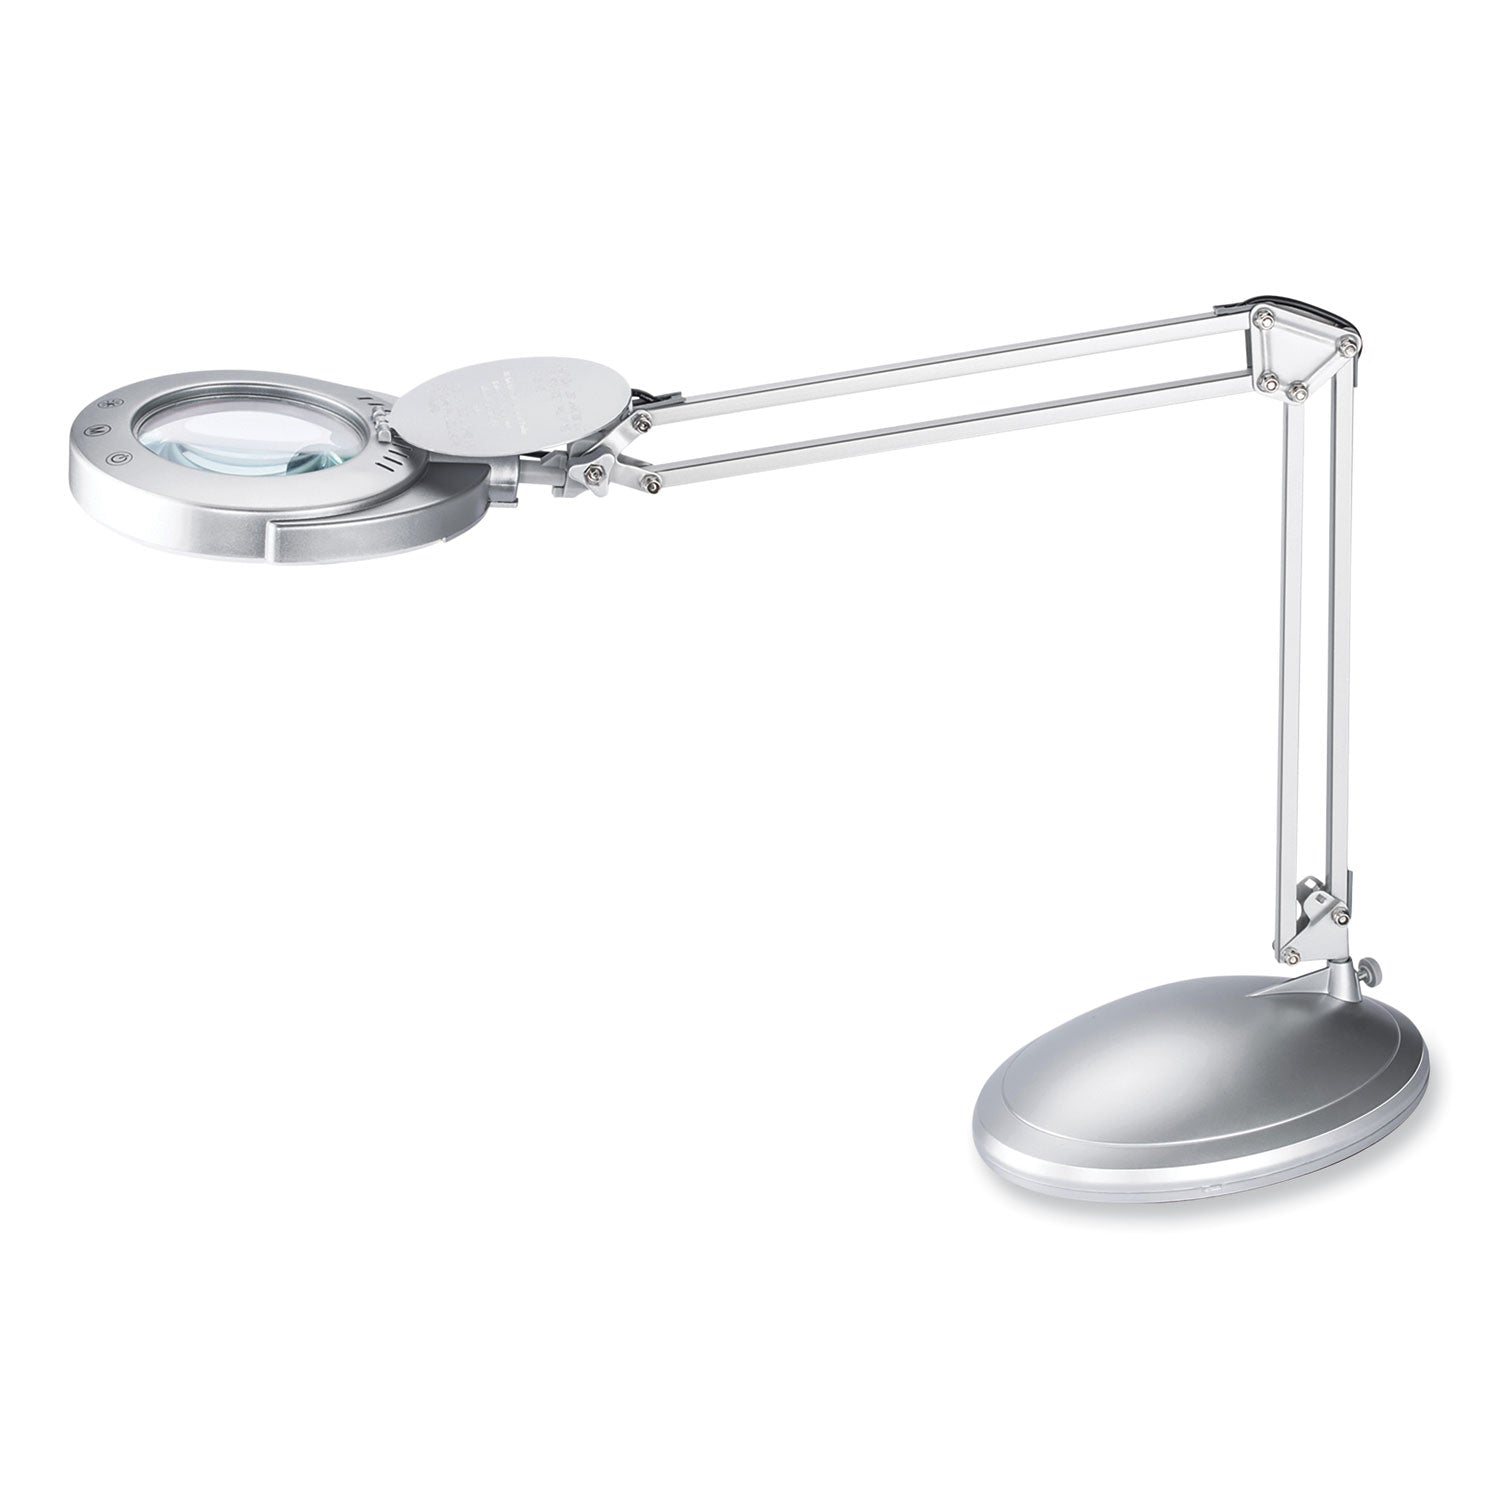 led-magnifier-lamp-with-clamp-swing-arm-22-high-silver-ships-in-4-6-business-days_vlu9vsl40203sc - 1